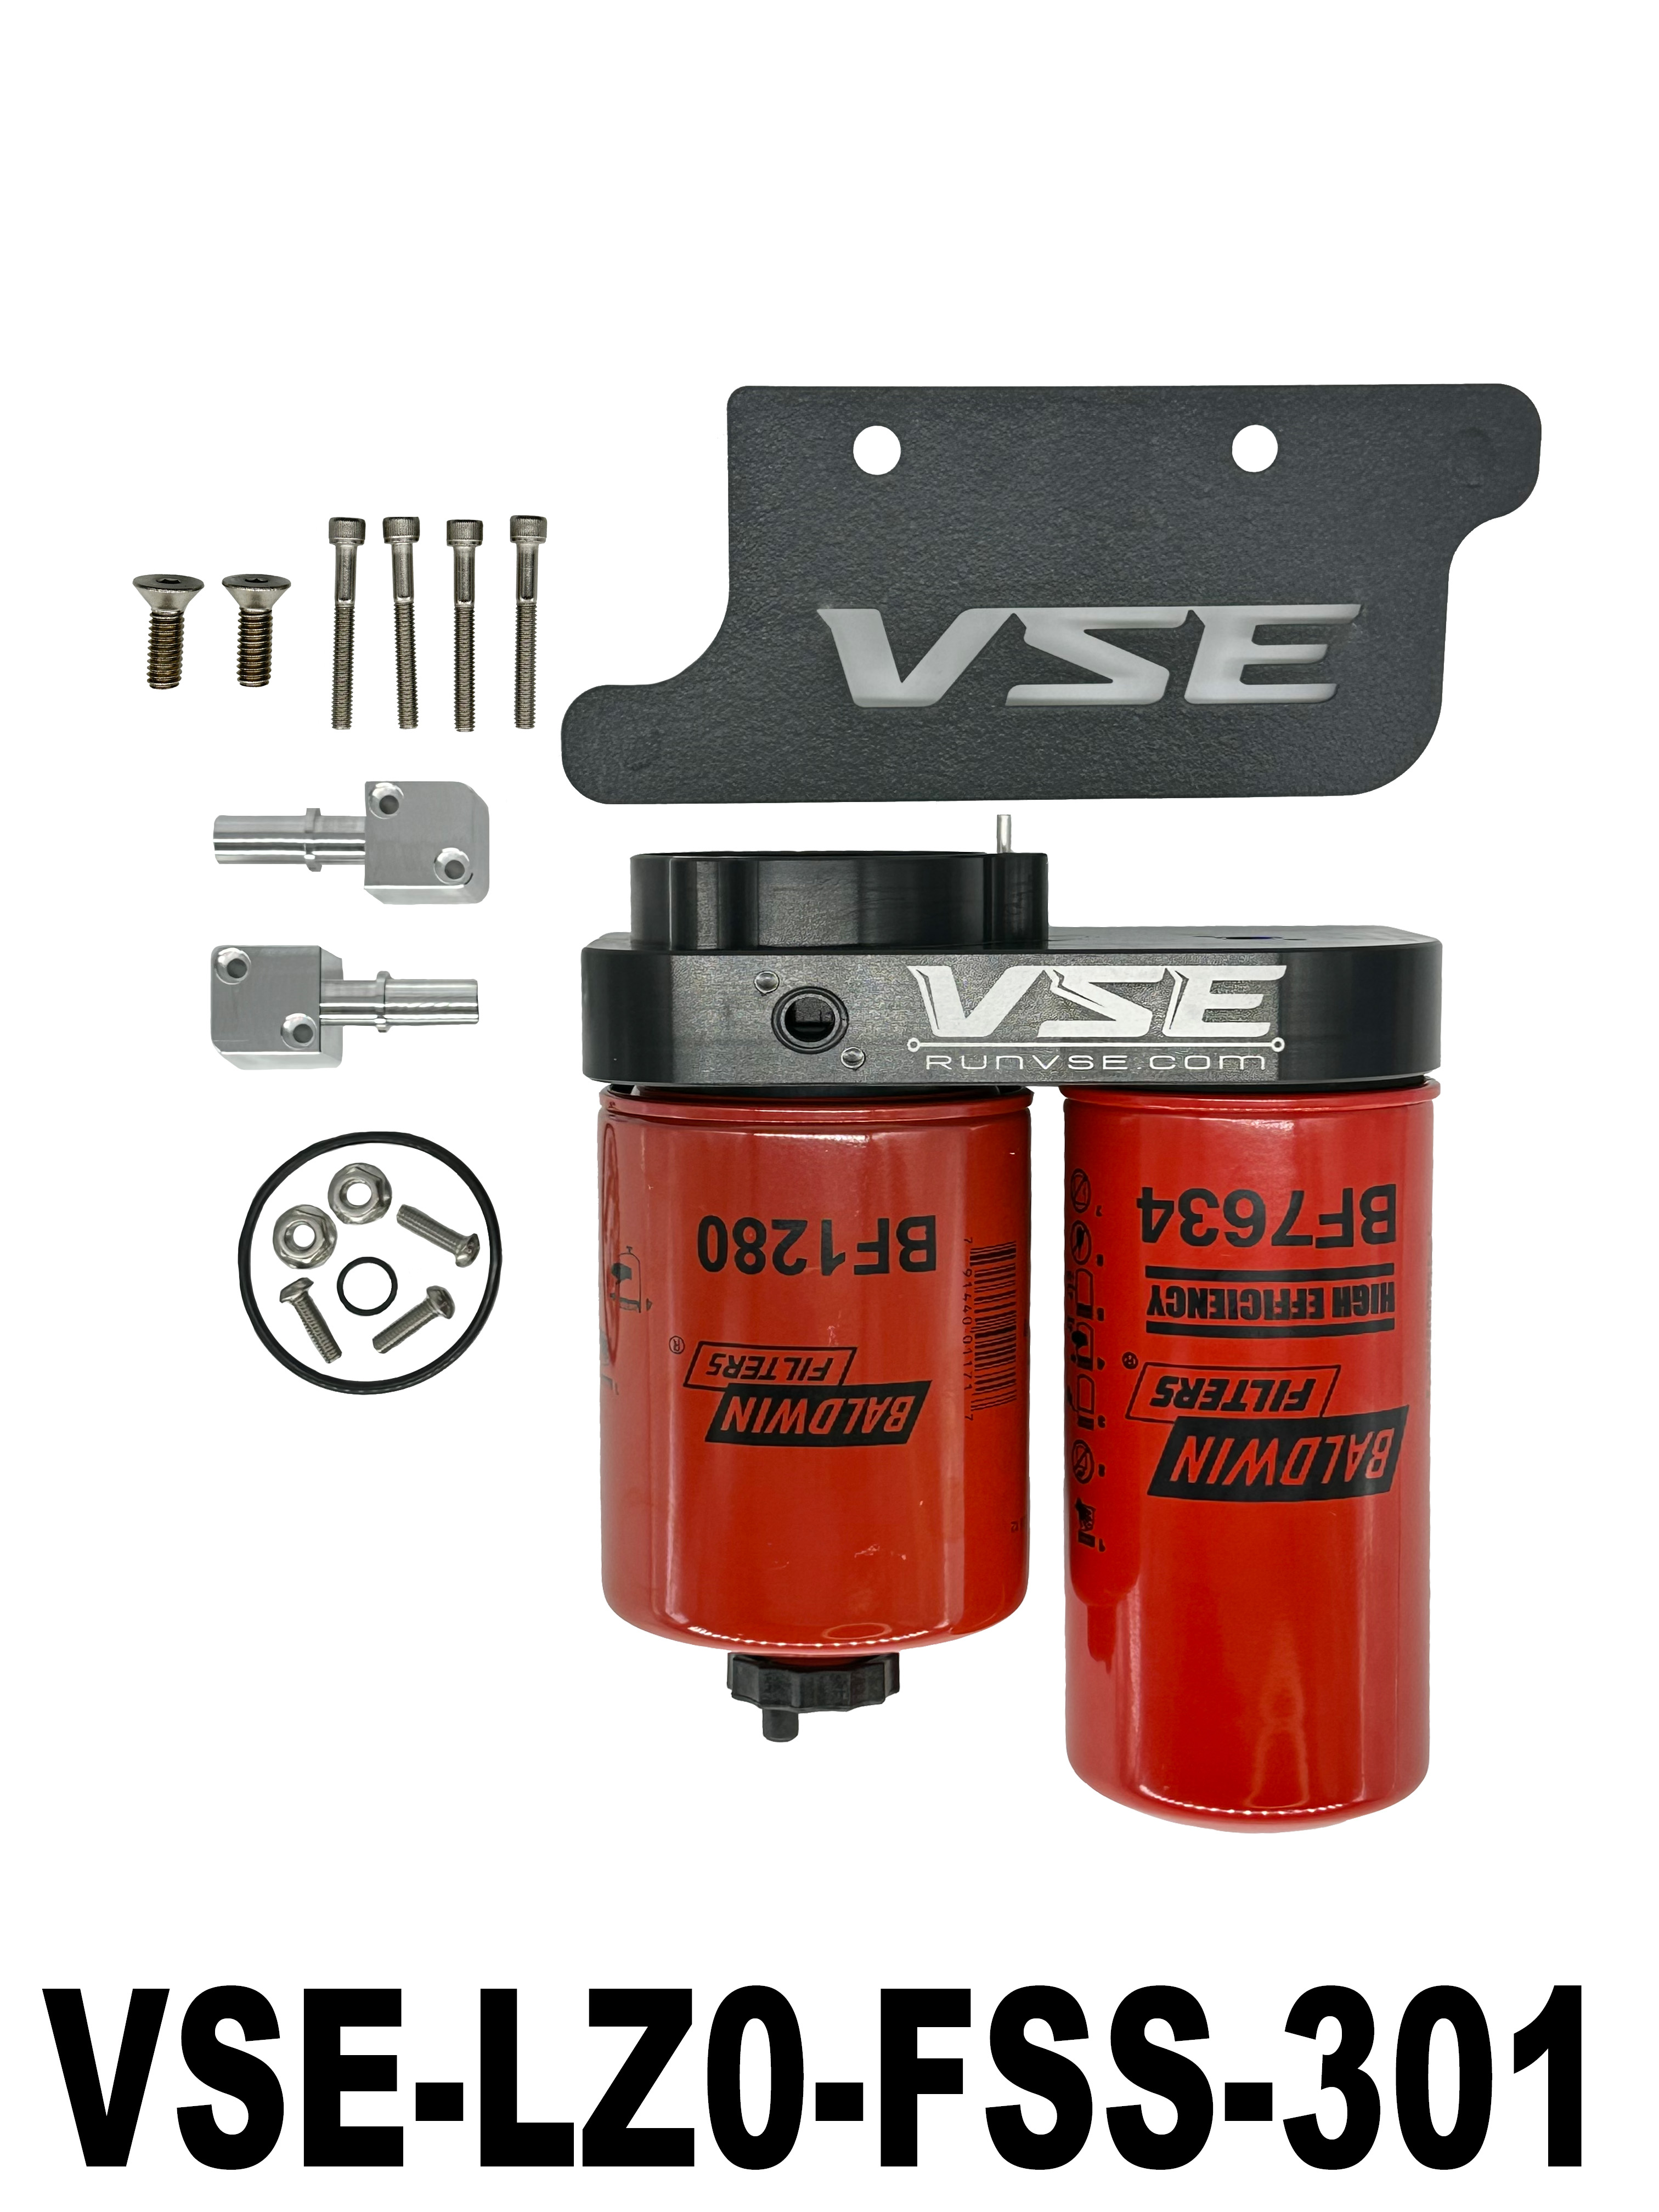 The BEST Cummins/Duramax Fuel Filtration Available